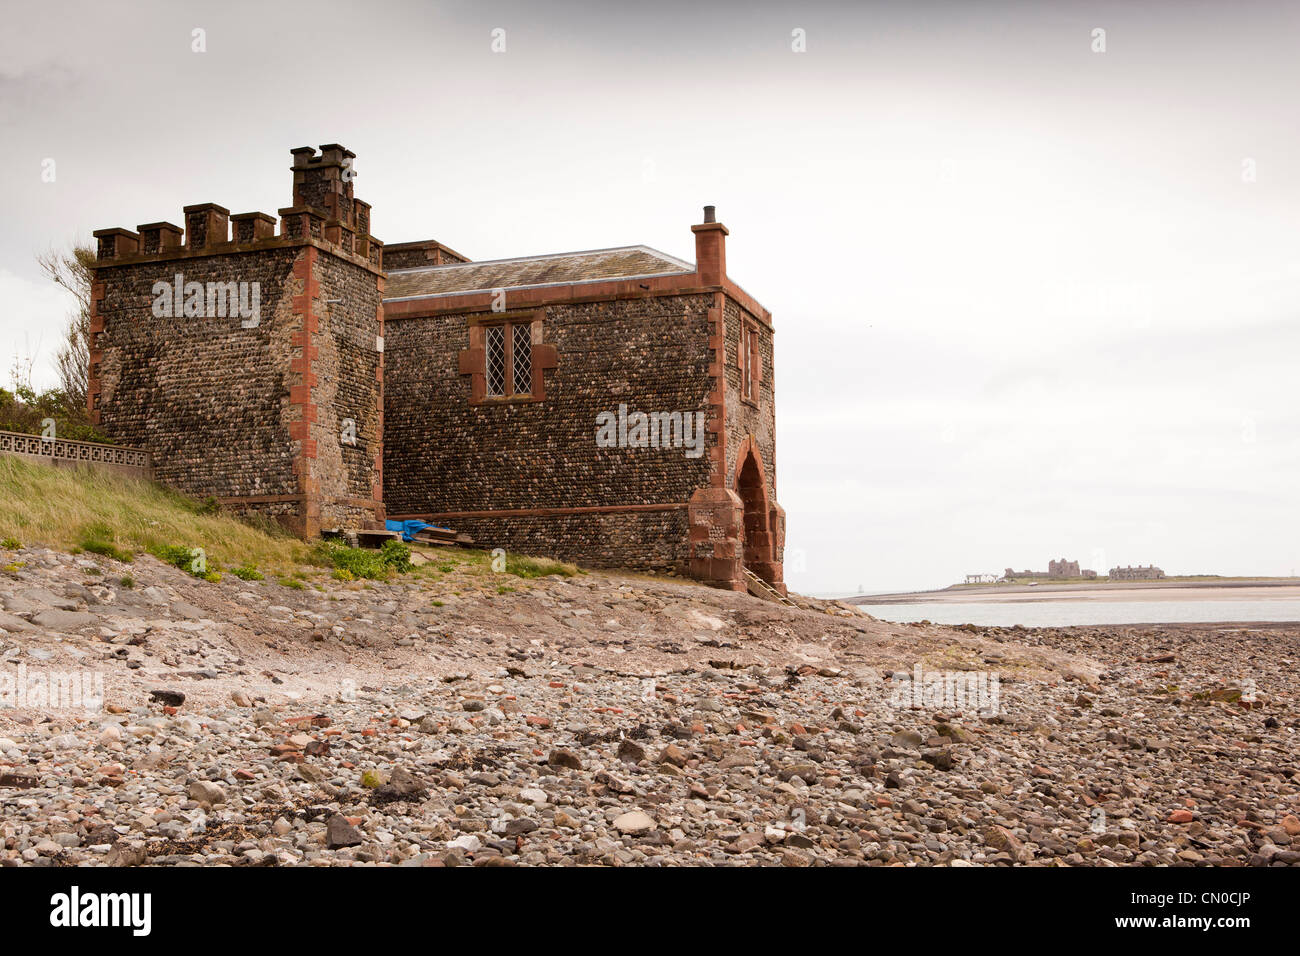 UK, Cumbria, Barrow in Furness, Roa Island, Customs and Excise House on shore with Piel Island in distance Stock Photo